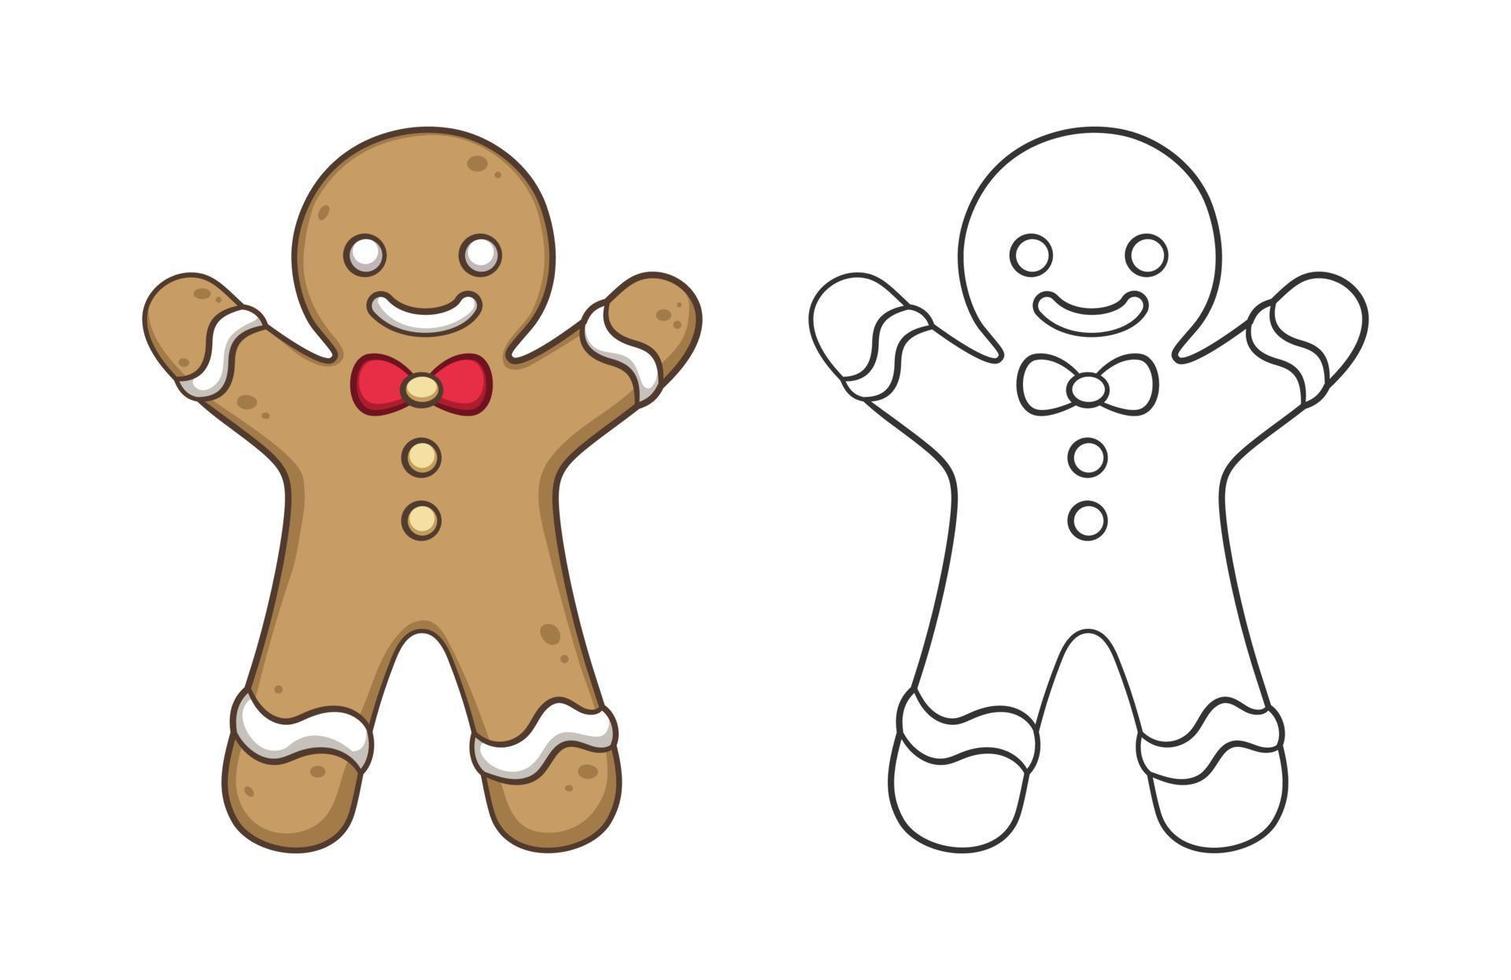 Cute gingerbread man with a bow tie outline and colored doodle cartoon illustration set. Winter Christmas theme coloring book page activity for kids and adults. vector